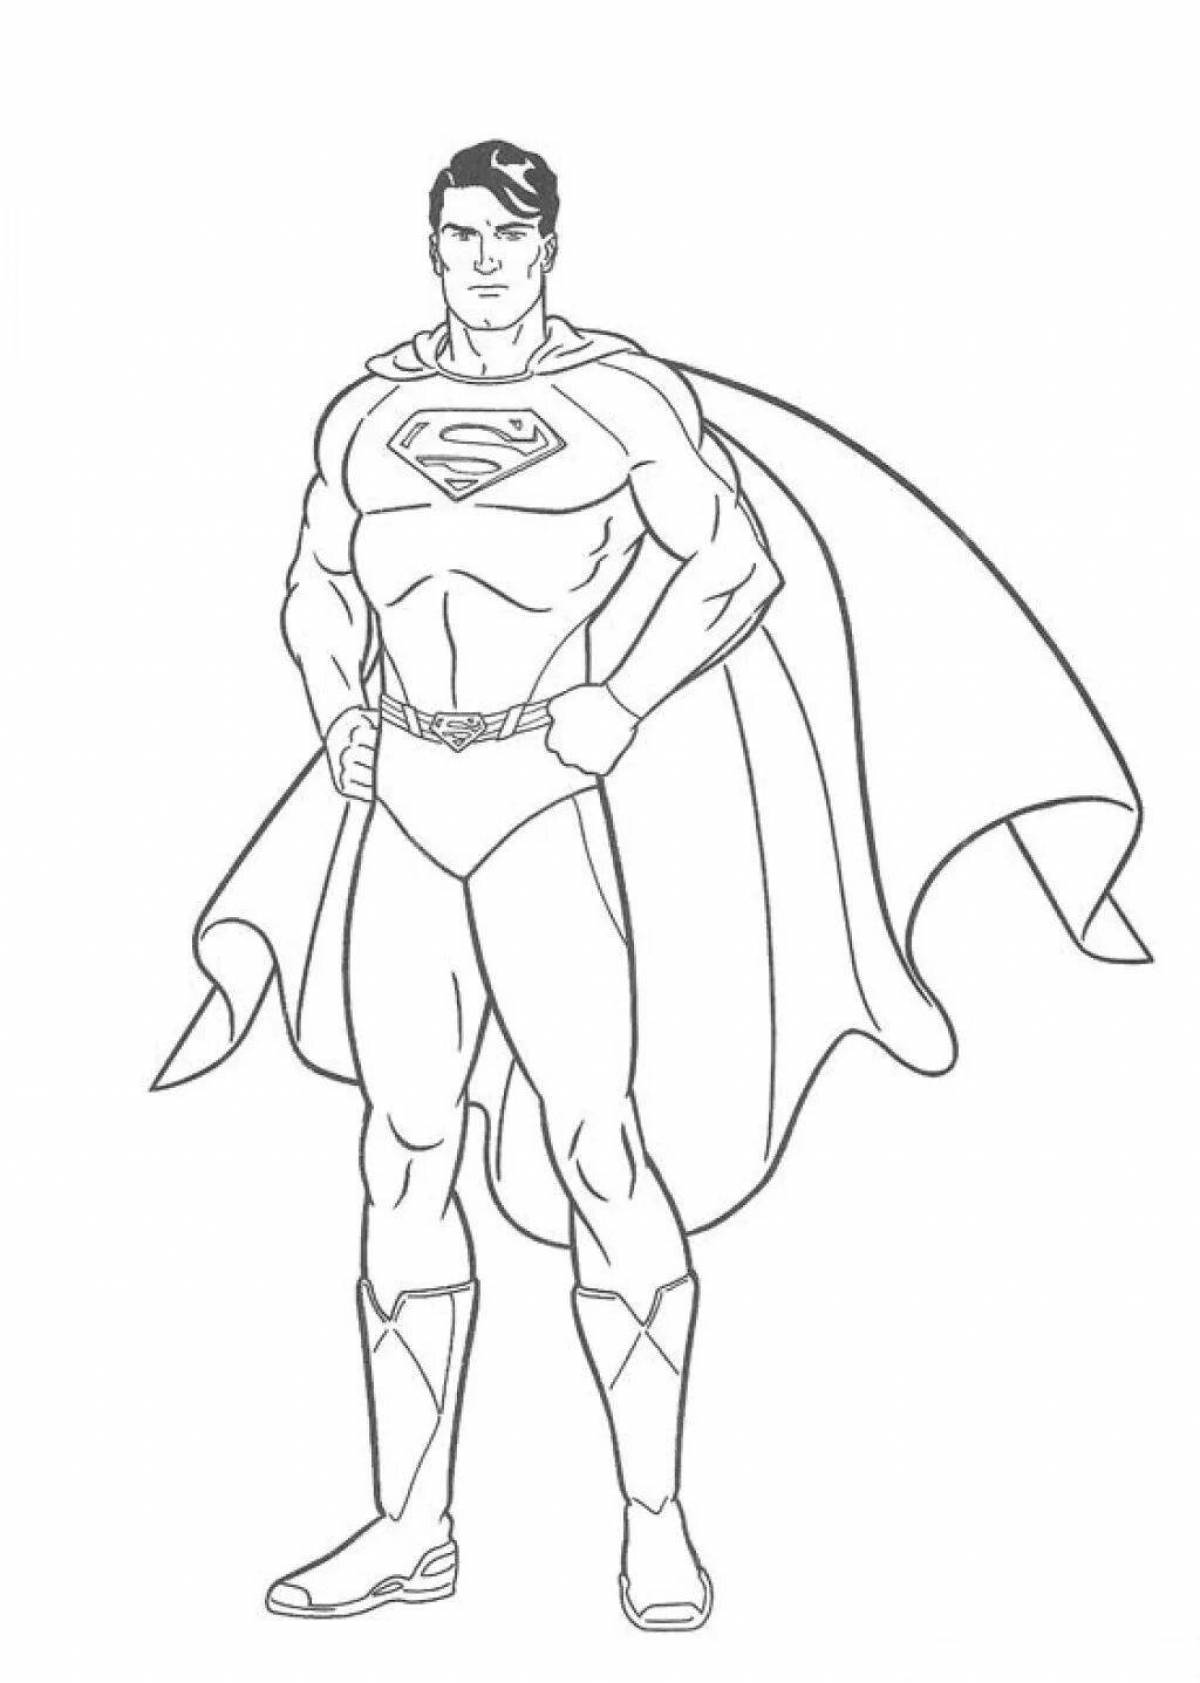 Superman coloring book for kids